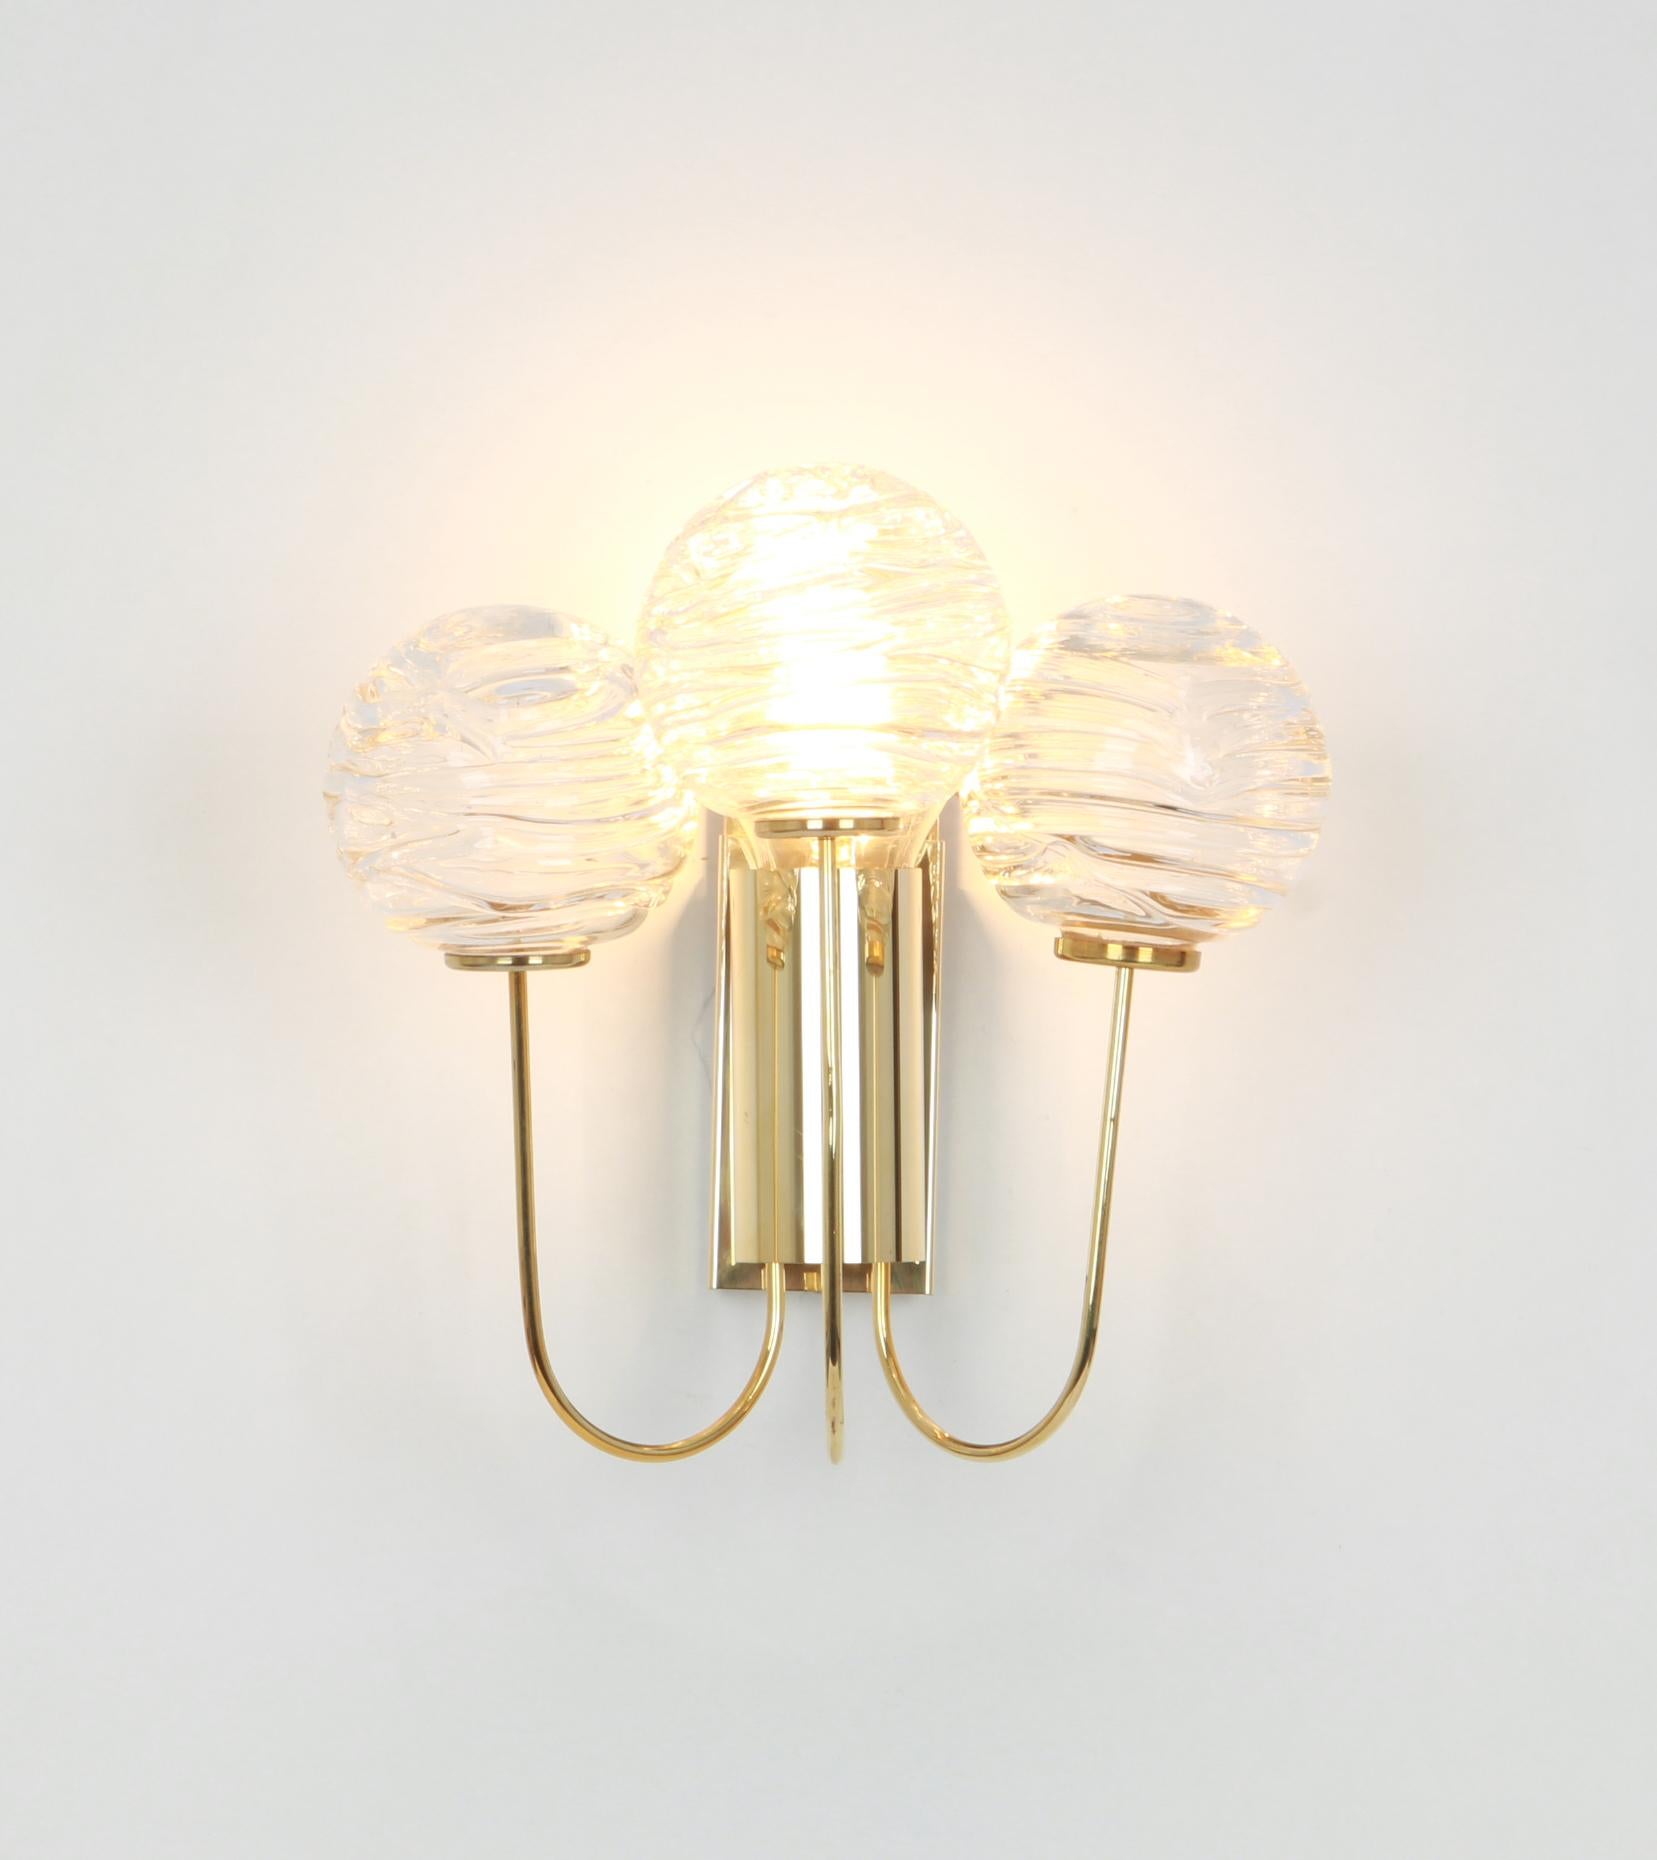 Mid-20th Century Pair of Rare Sputnik Brass and Murano Glass Wall Sconces by Doria, Germany, 1960 For Sale